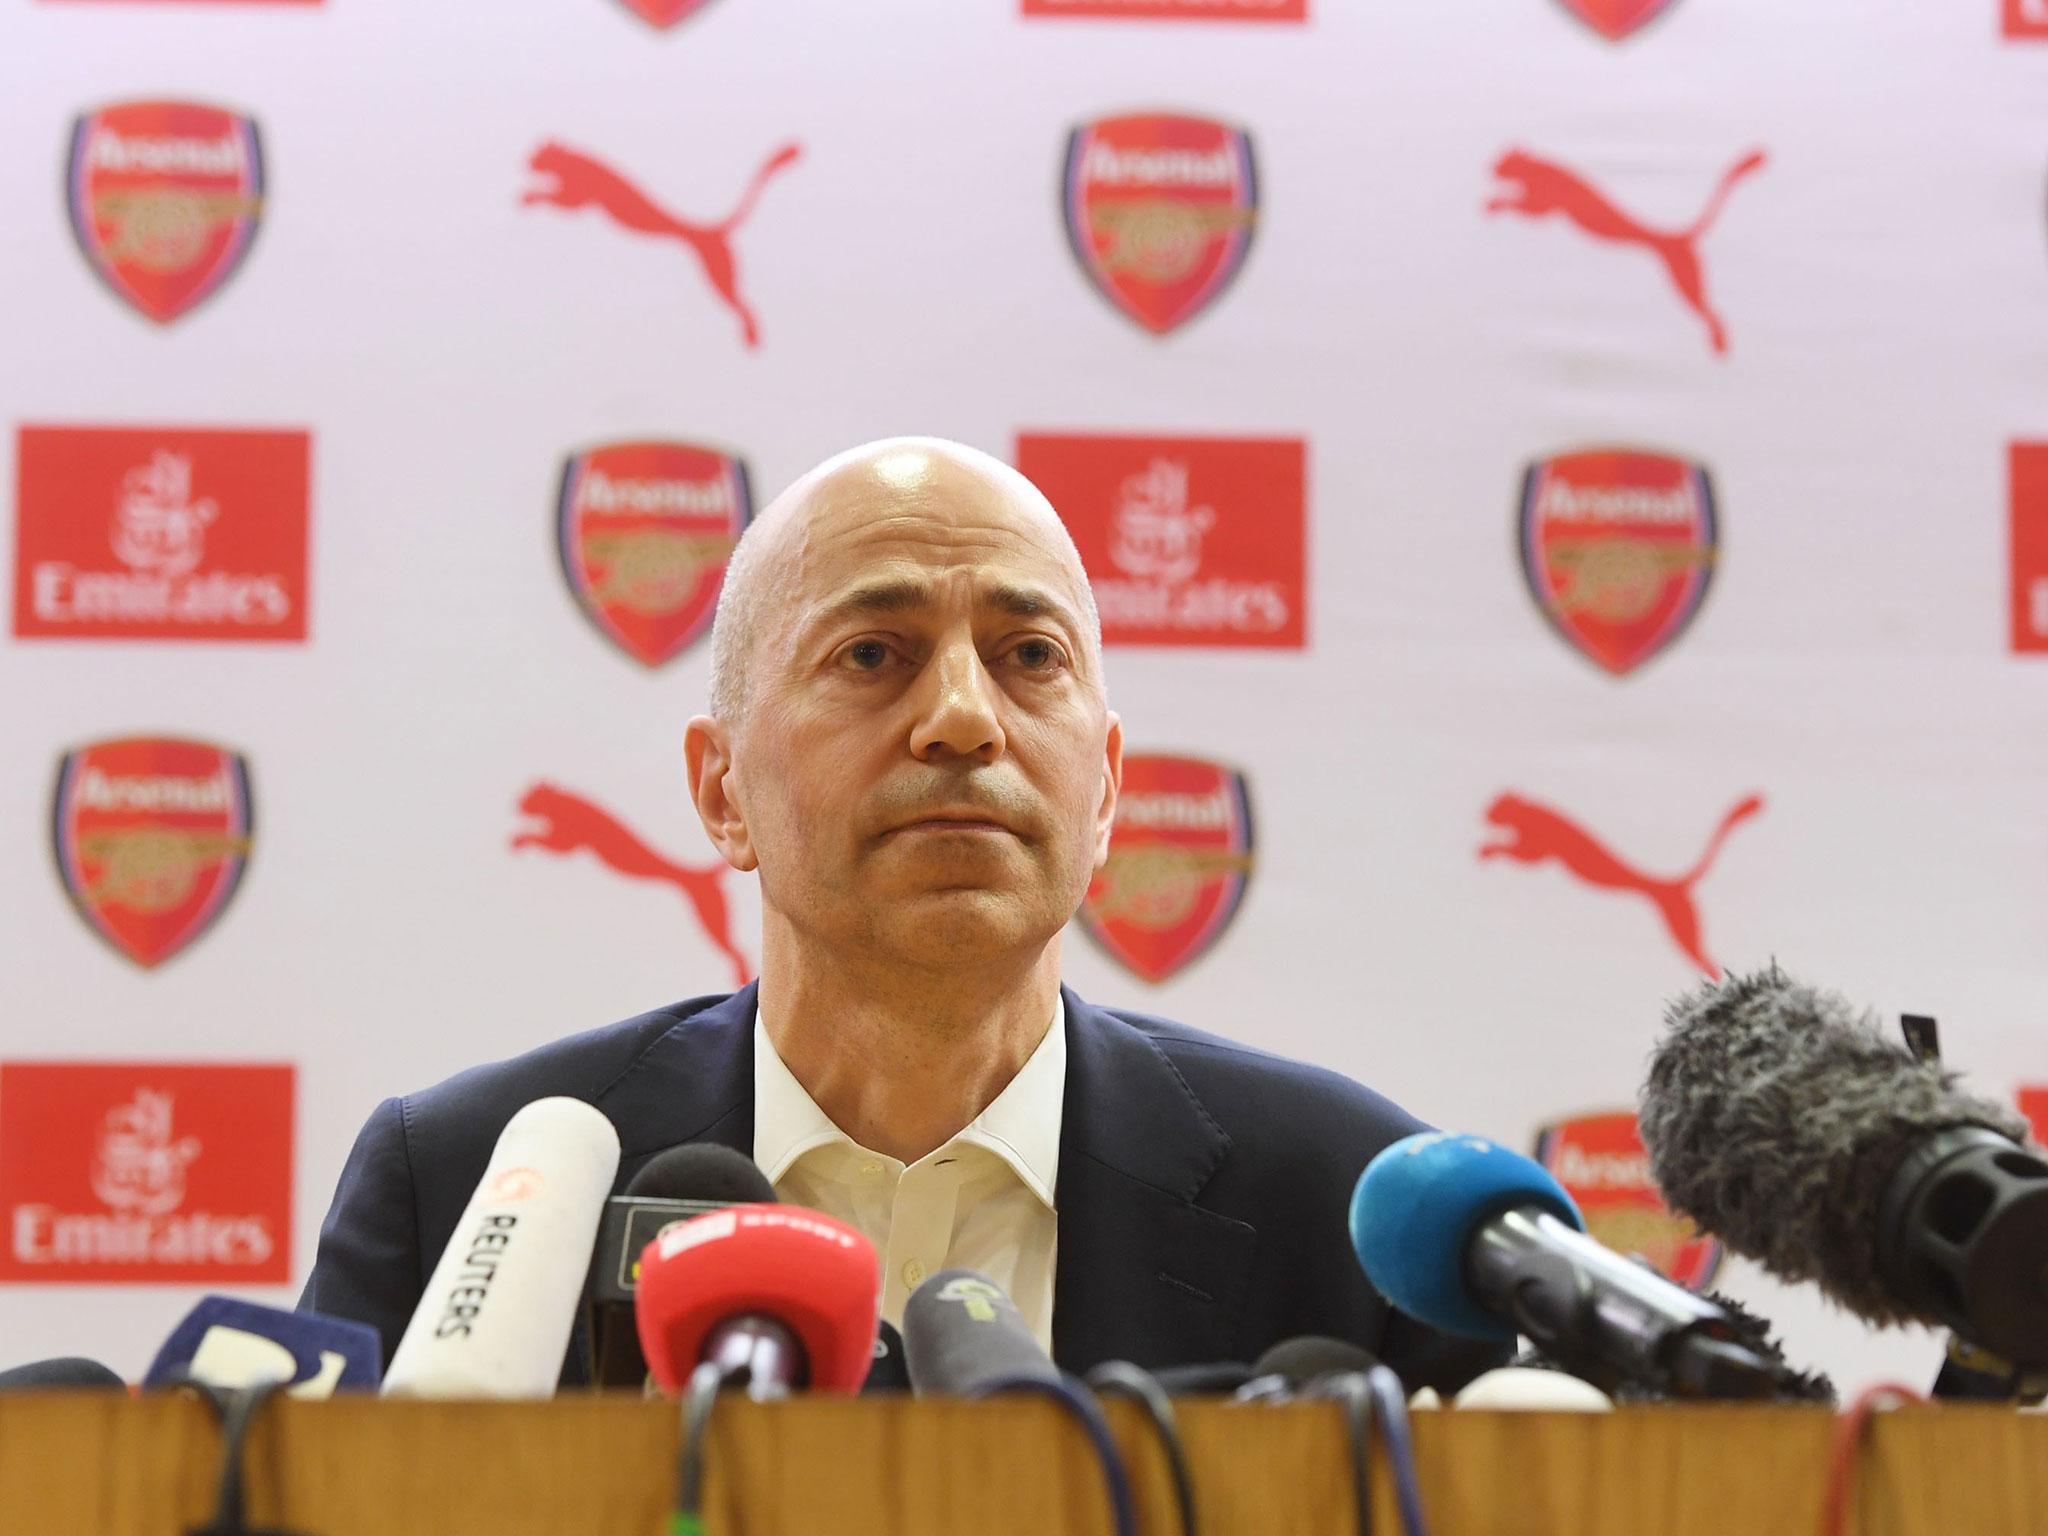 Ivan Gazidis pointed to style of play, rather than results and trophies, as the first criteria for the new manager